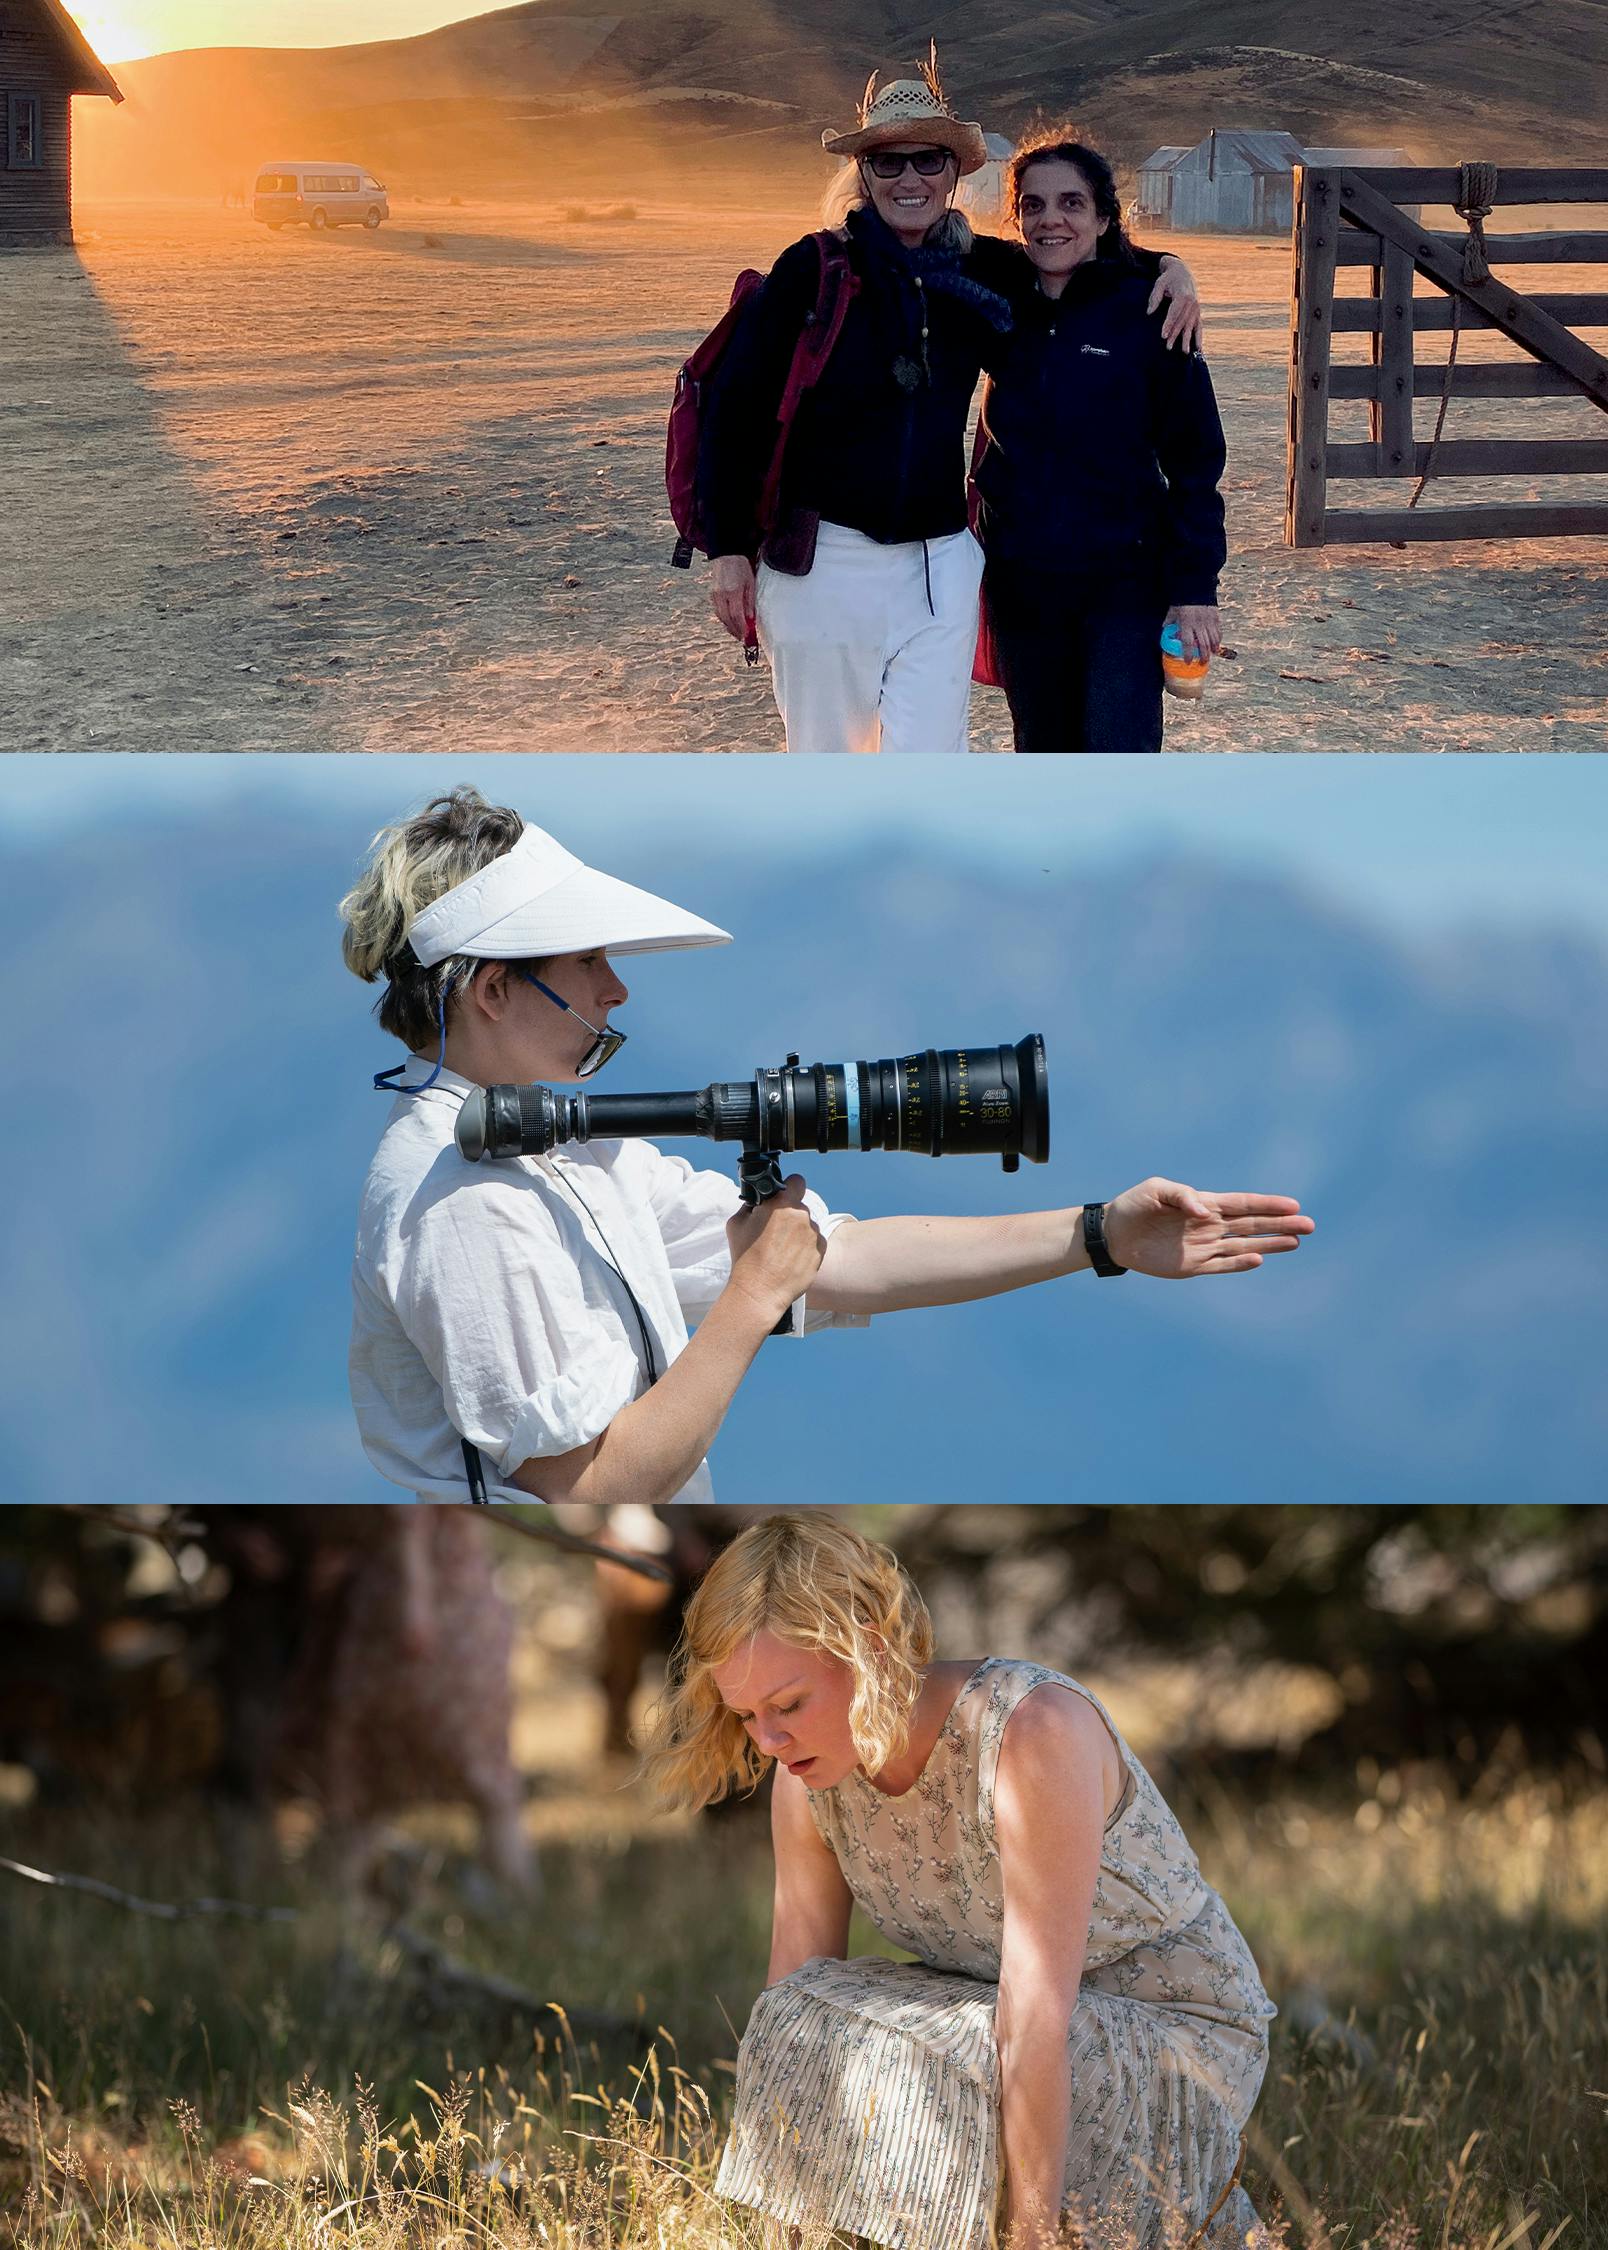 From top to bottom: Jane Campion and Tanya Seghatchian stand on a sunset-lit set; Ari Wegner holds a camera in an all-white outfit including a white visor; Kirsten Dunst wears a floral dress as she kneels in the grass.